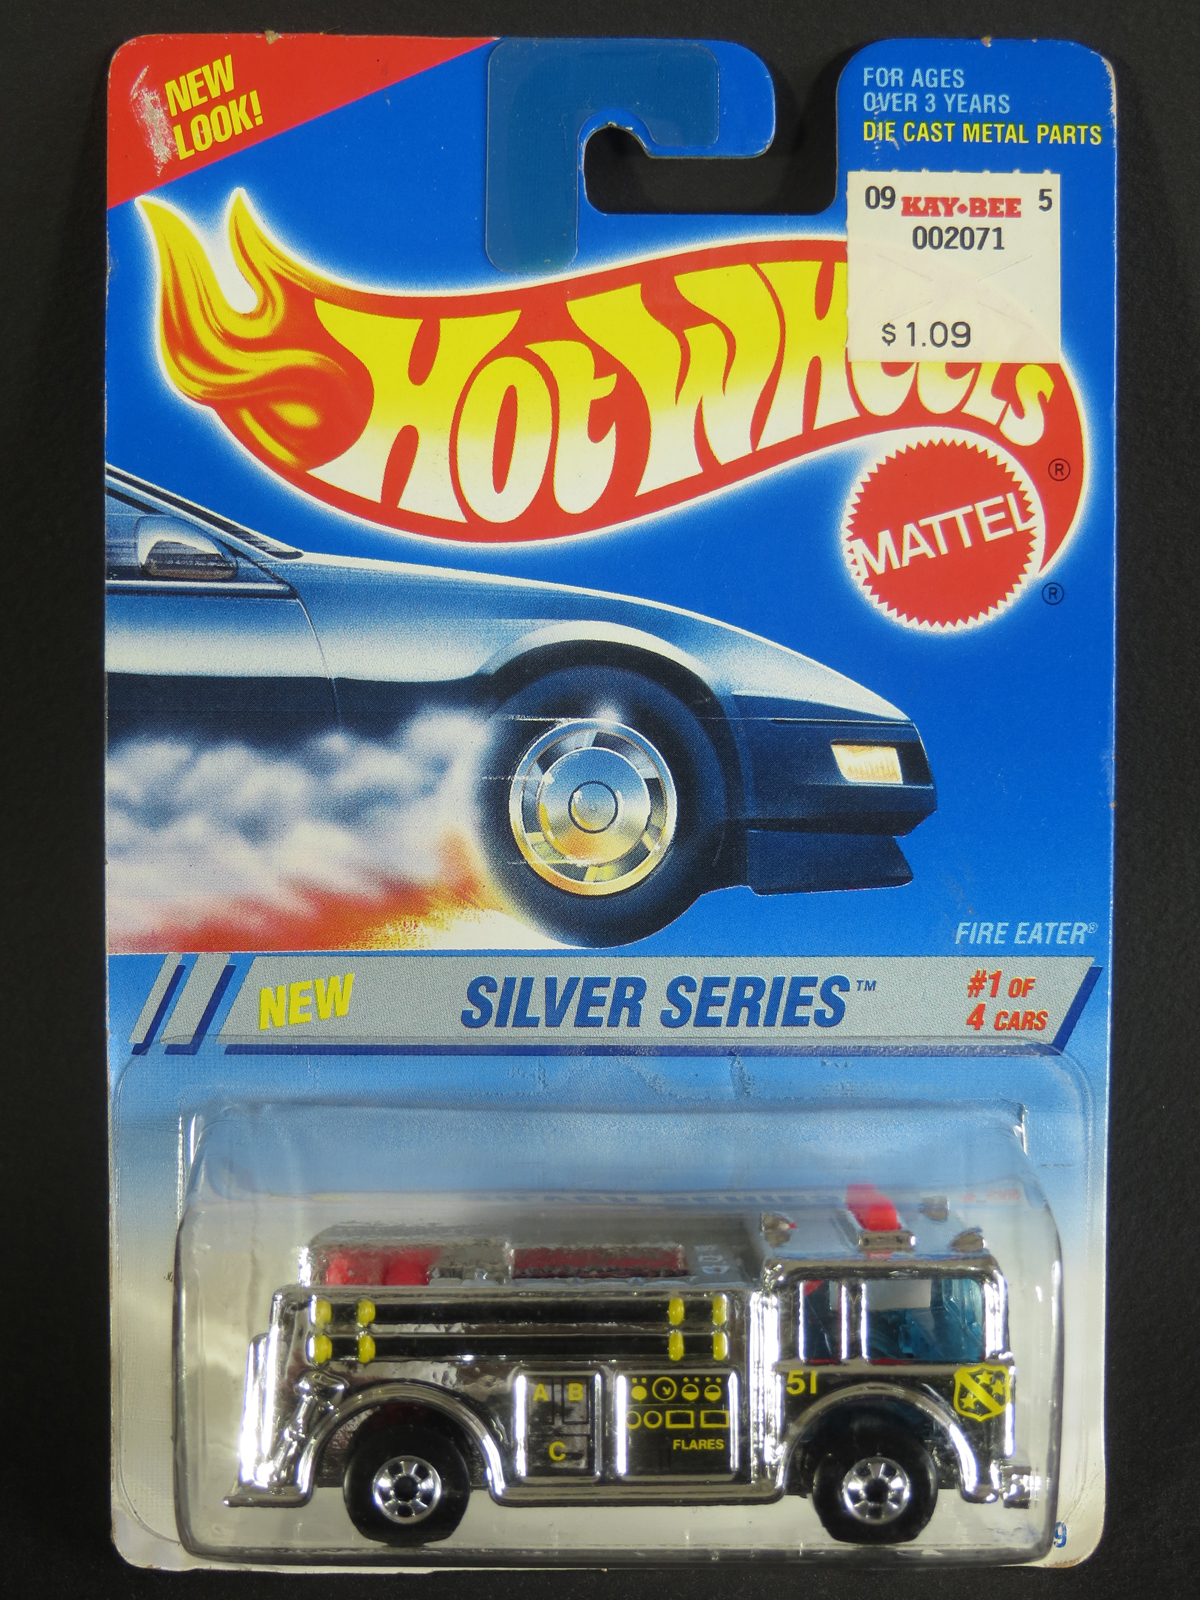 1995 Hot Wheels Silver Series Fire Eater | The Race Case